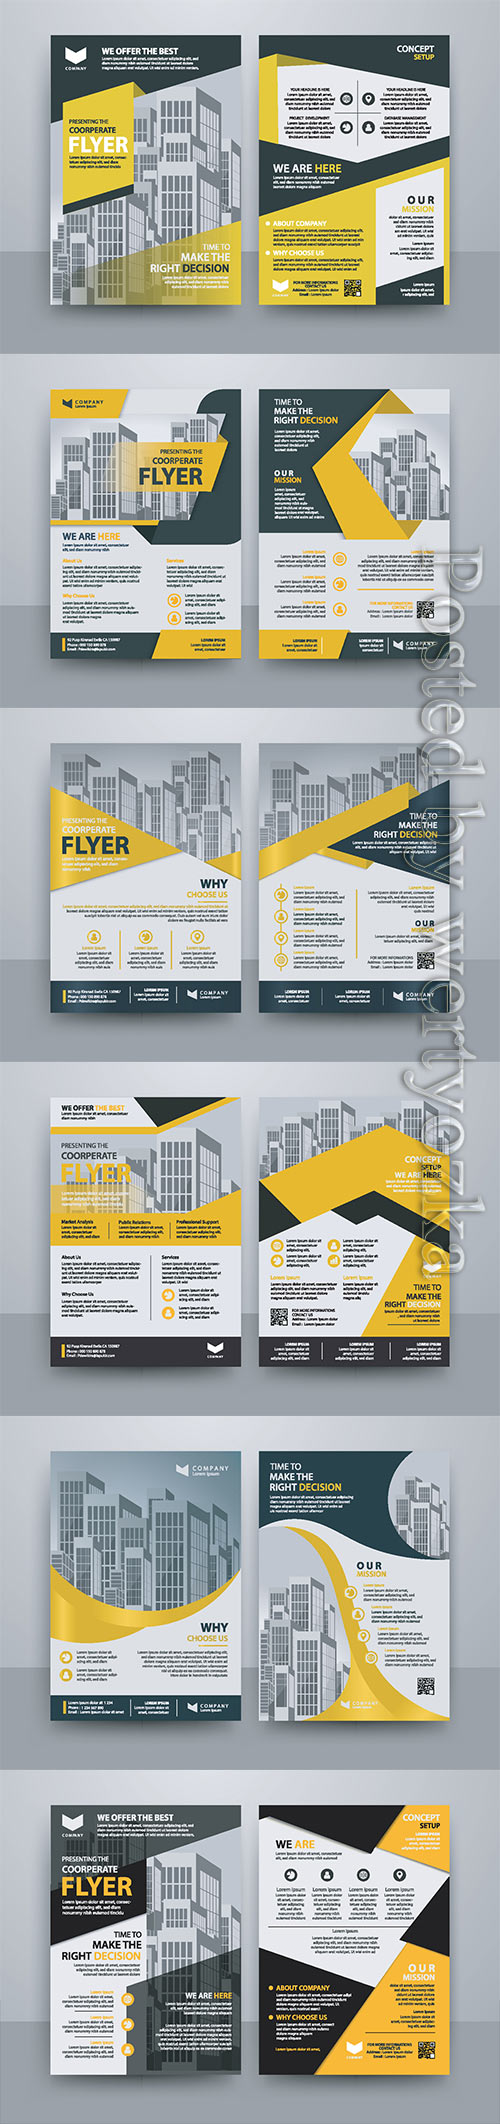 Business vector template for brochure, annual report, magazine # 16